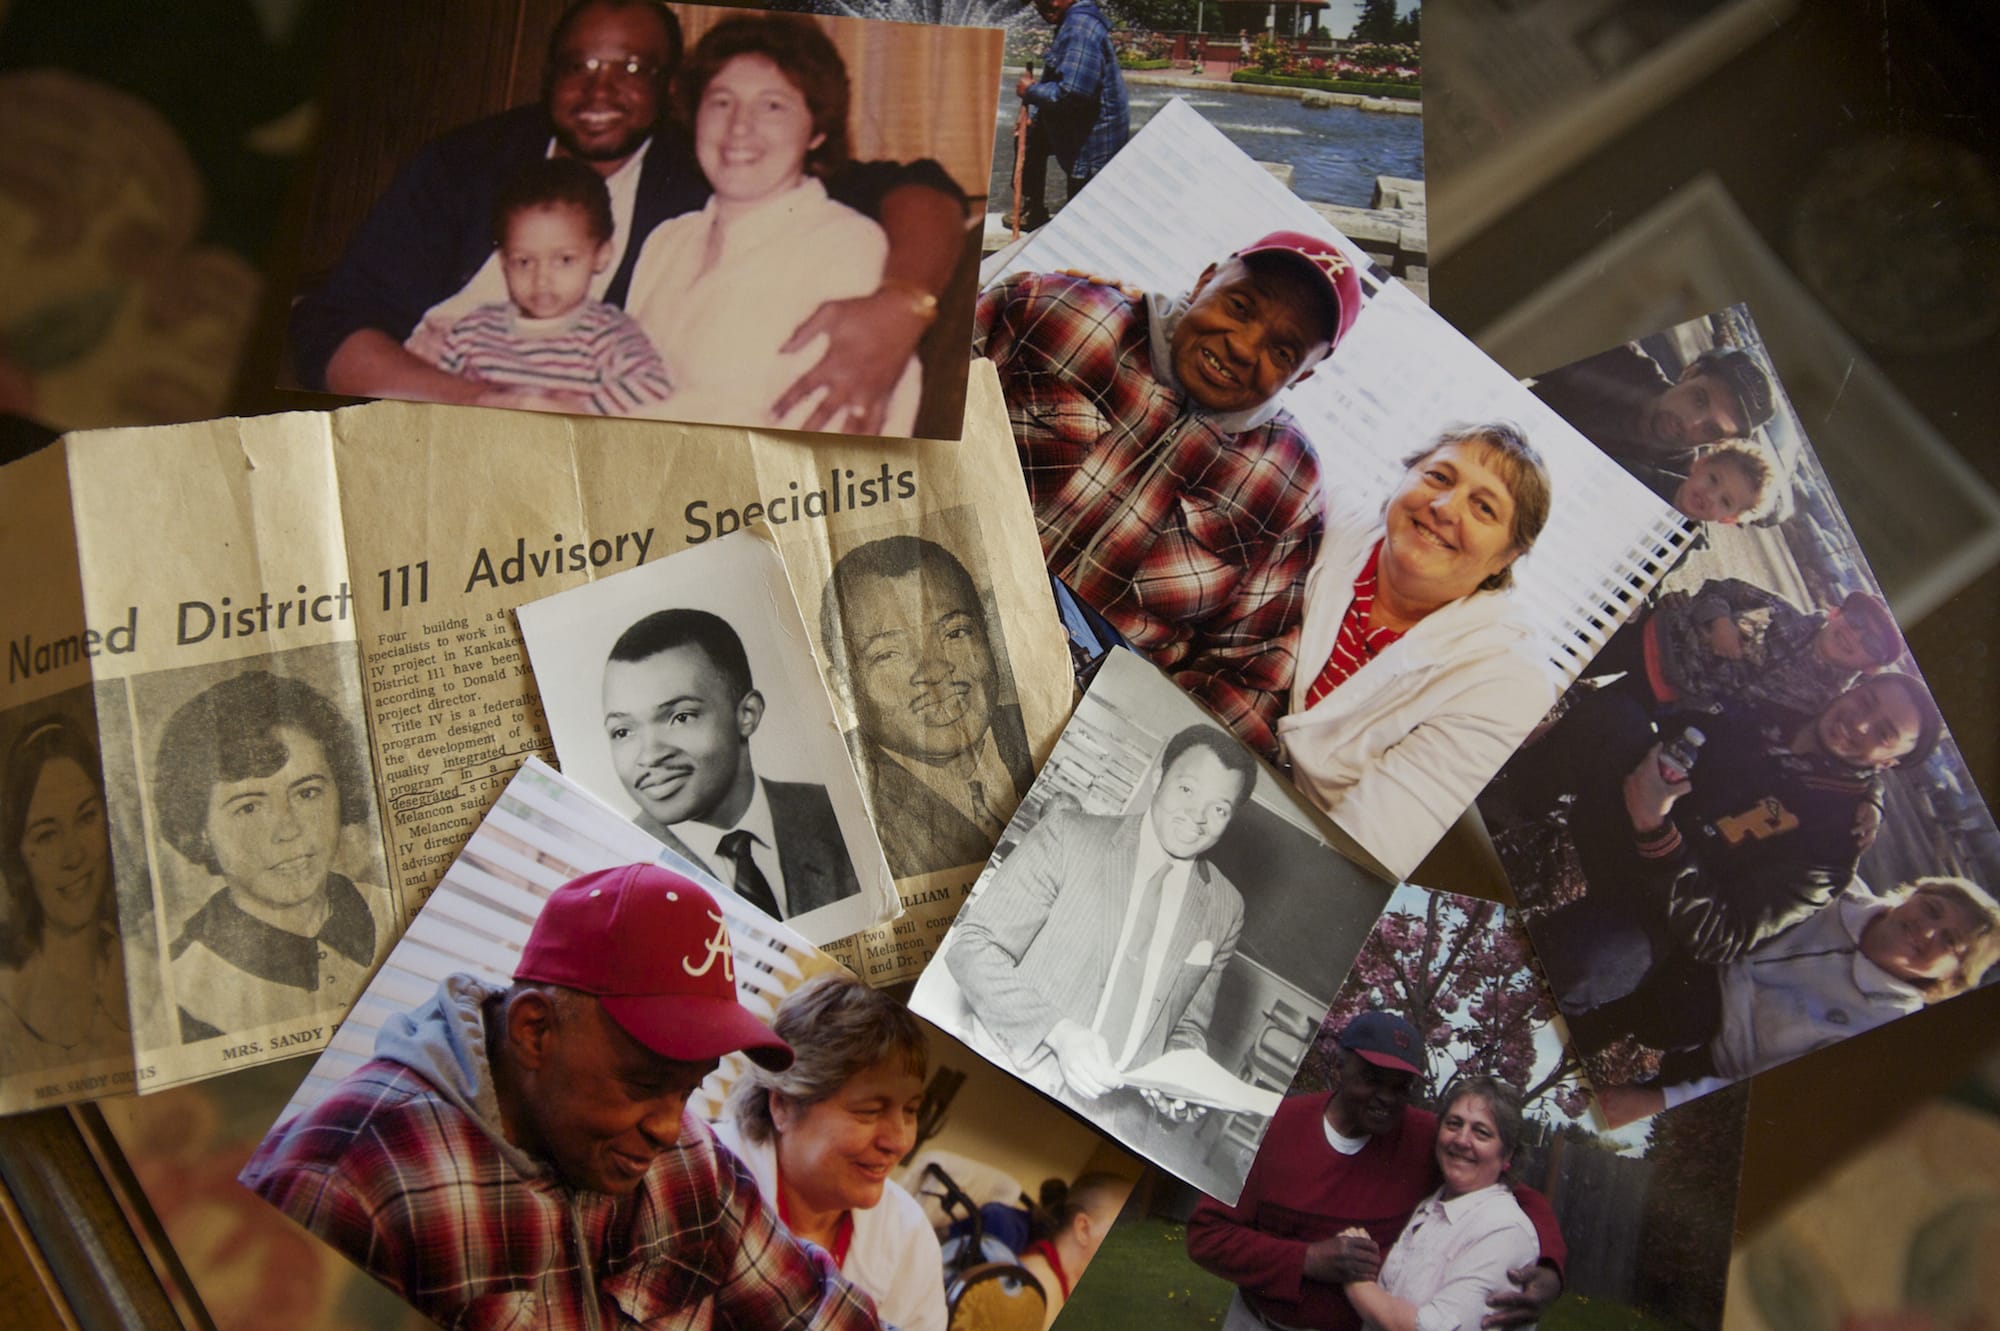 Photos show William Andrews with his family. Williams, who taught at Clark County Juvenile Detention Center, died Jan.